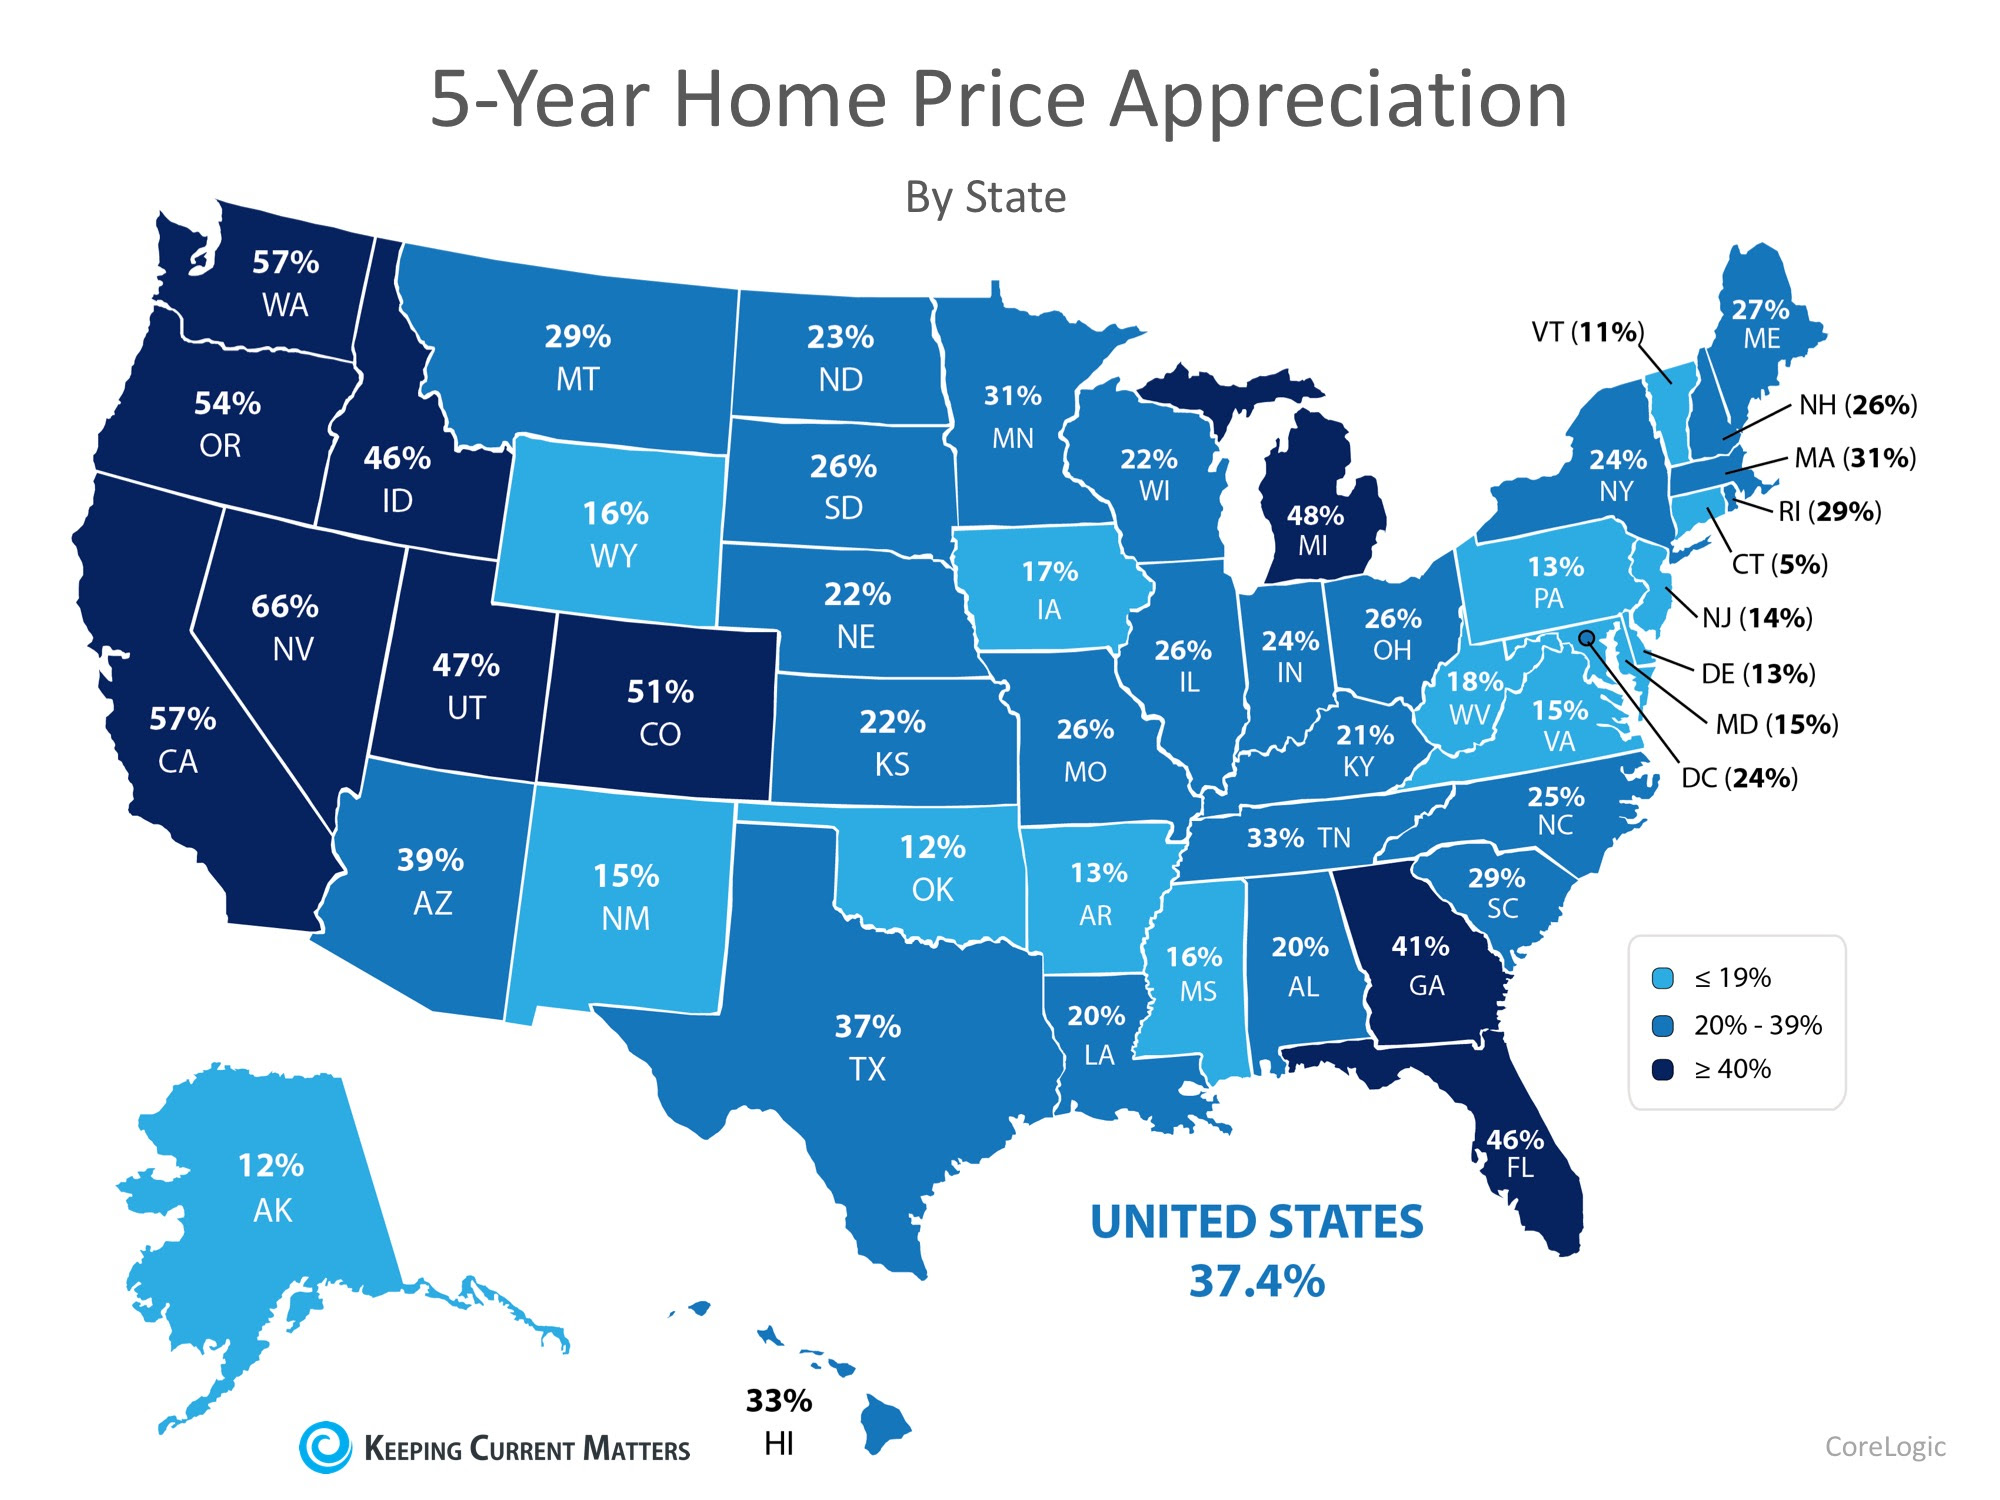 5 Year Home Price Appreciation by State